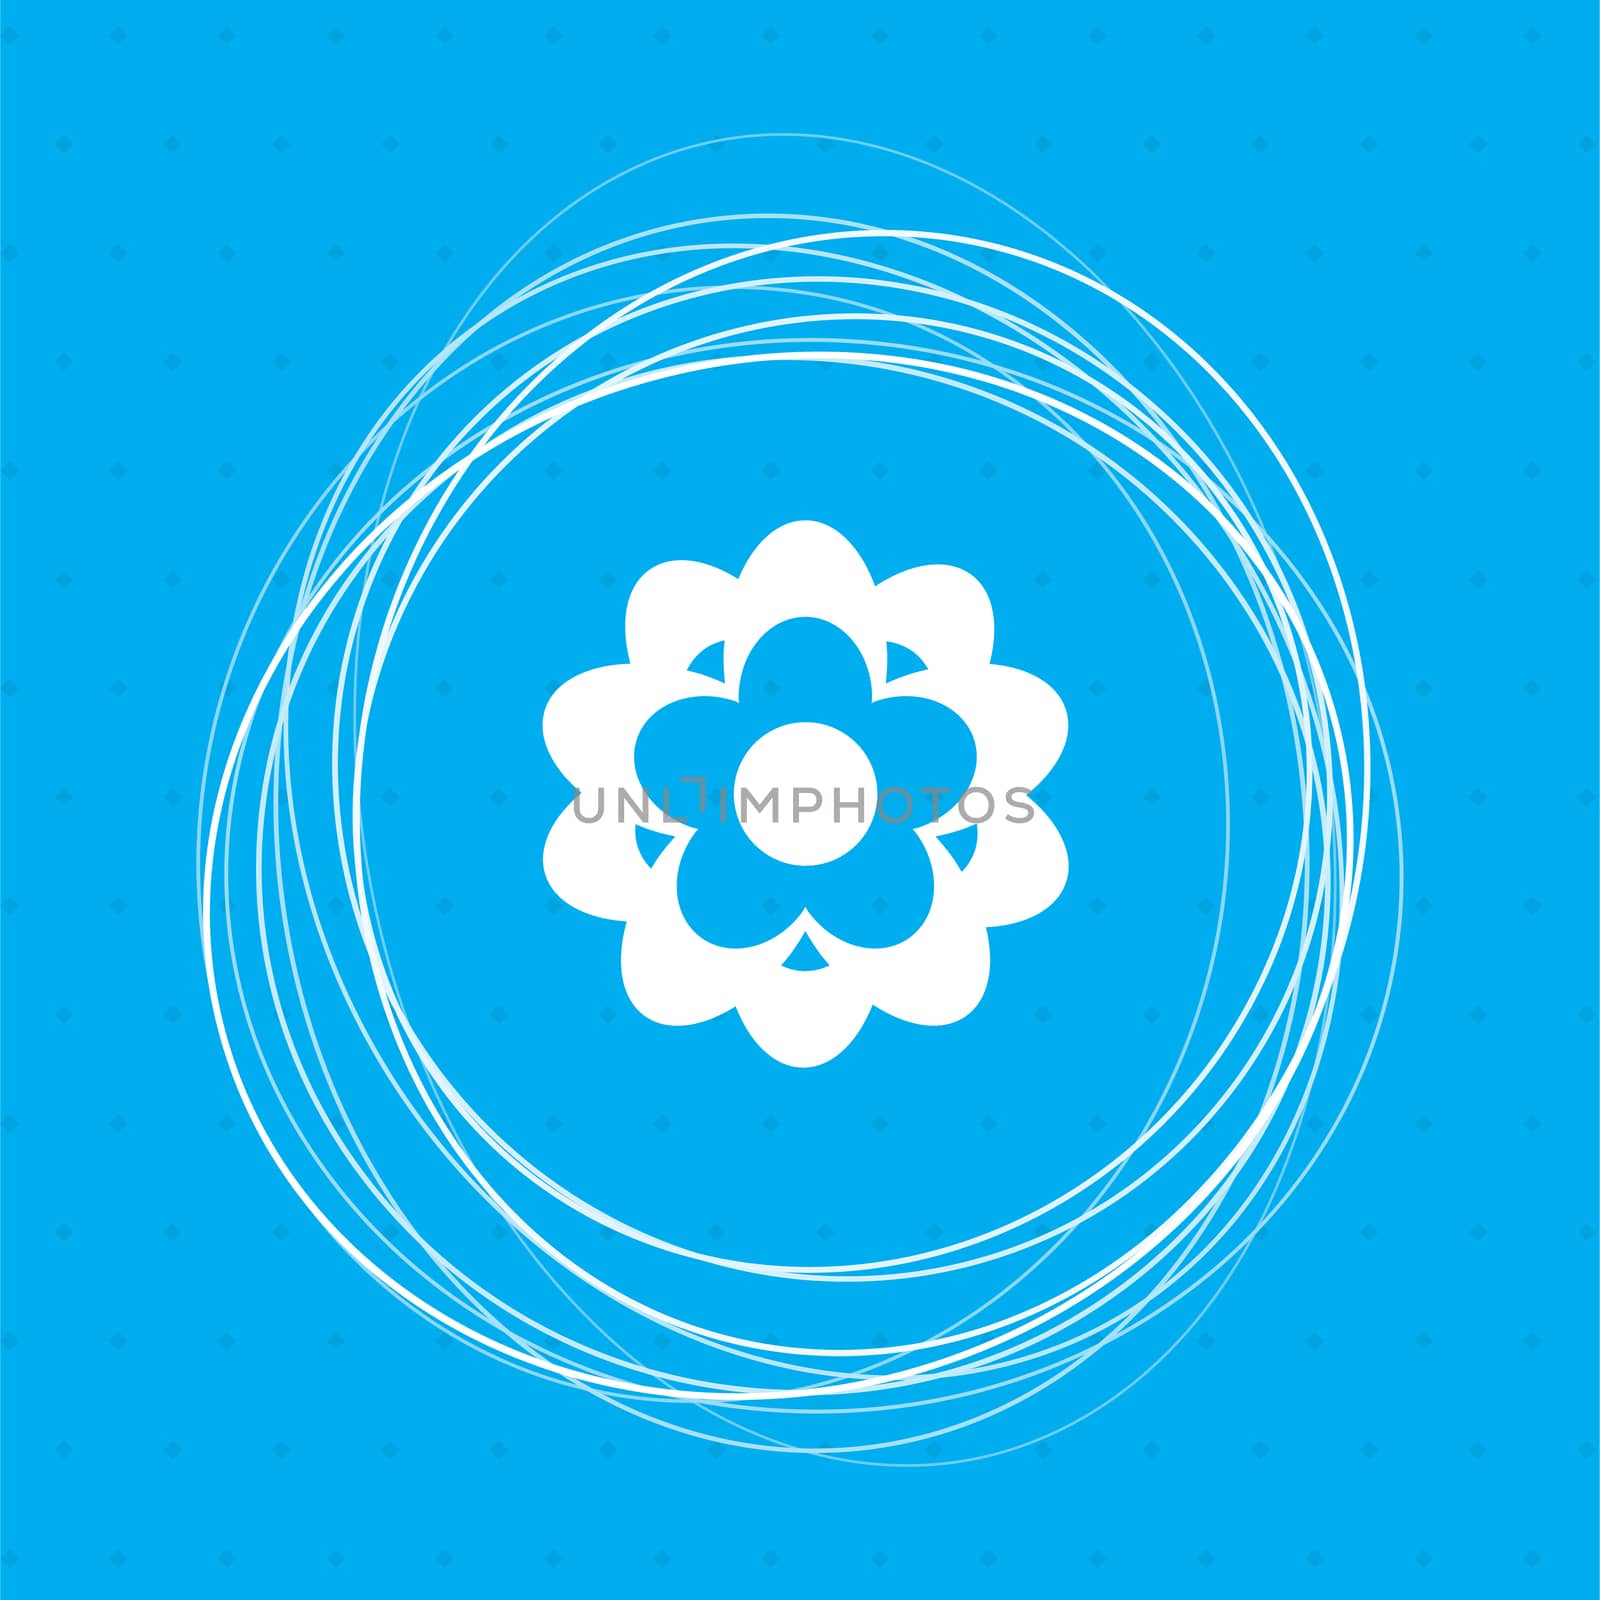 flower icon on a blue background with abstract circles around and place for your text.  by Adamchuk